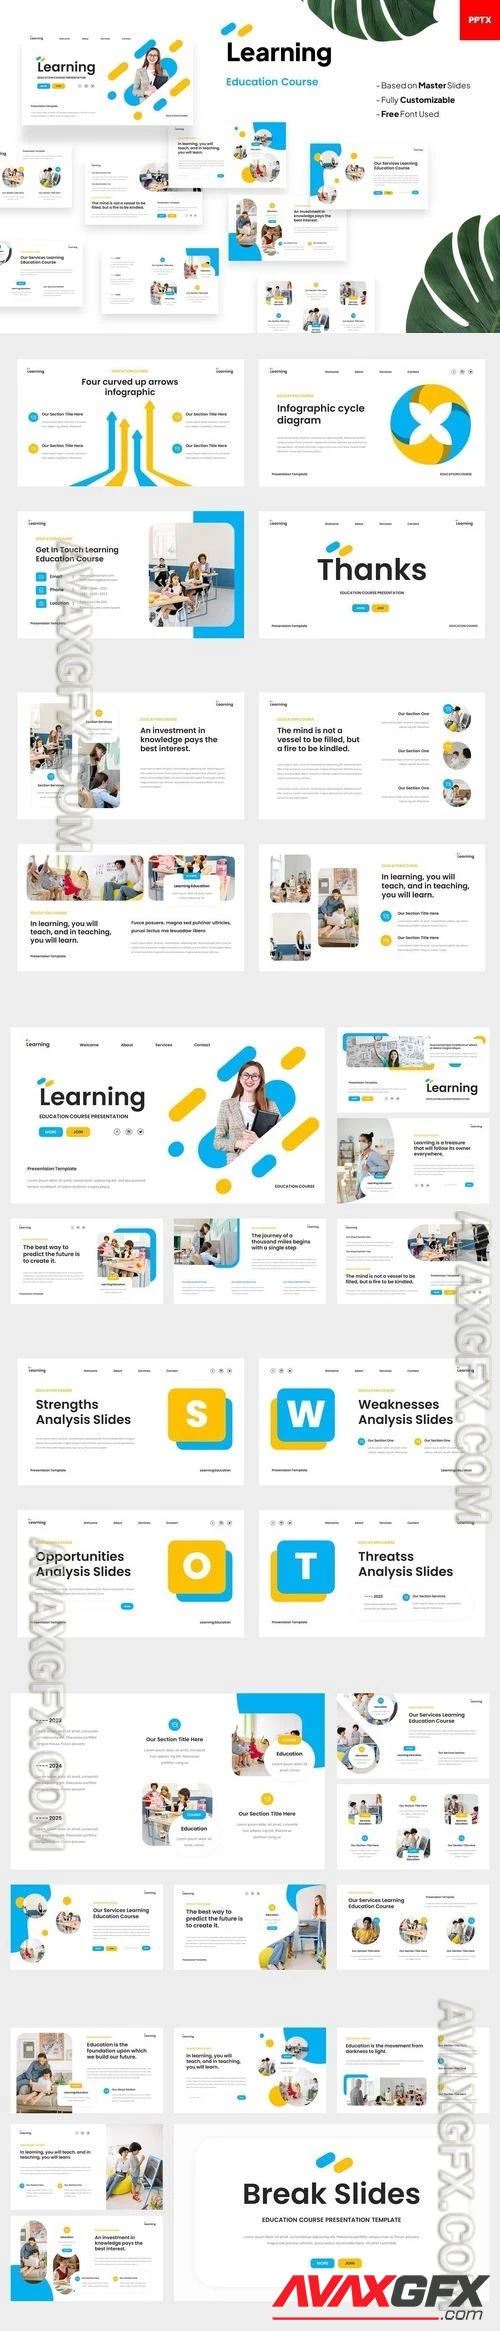 Learning - Education Course Powerpoint Template